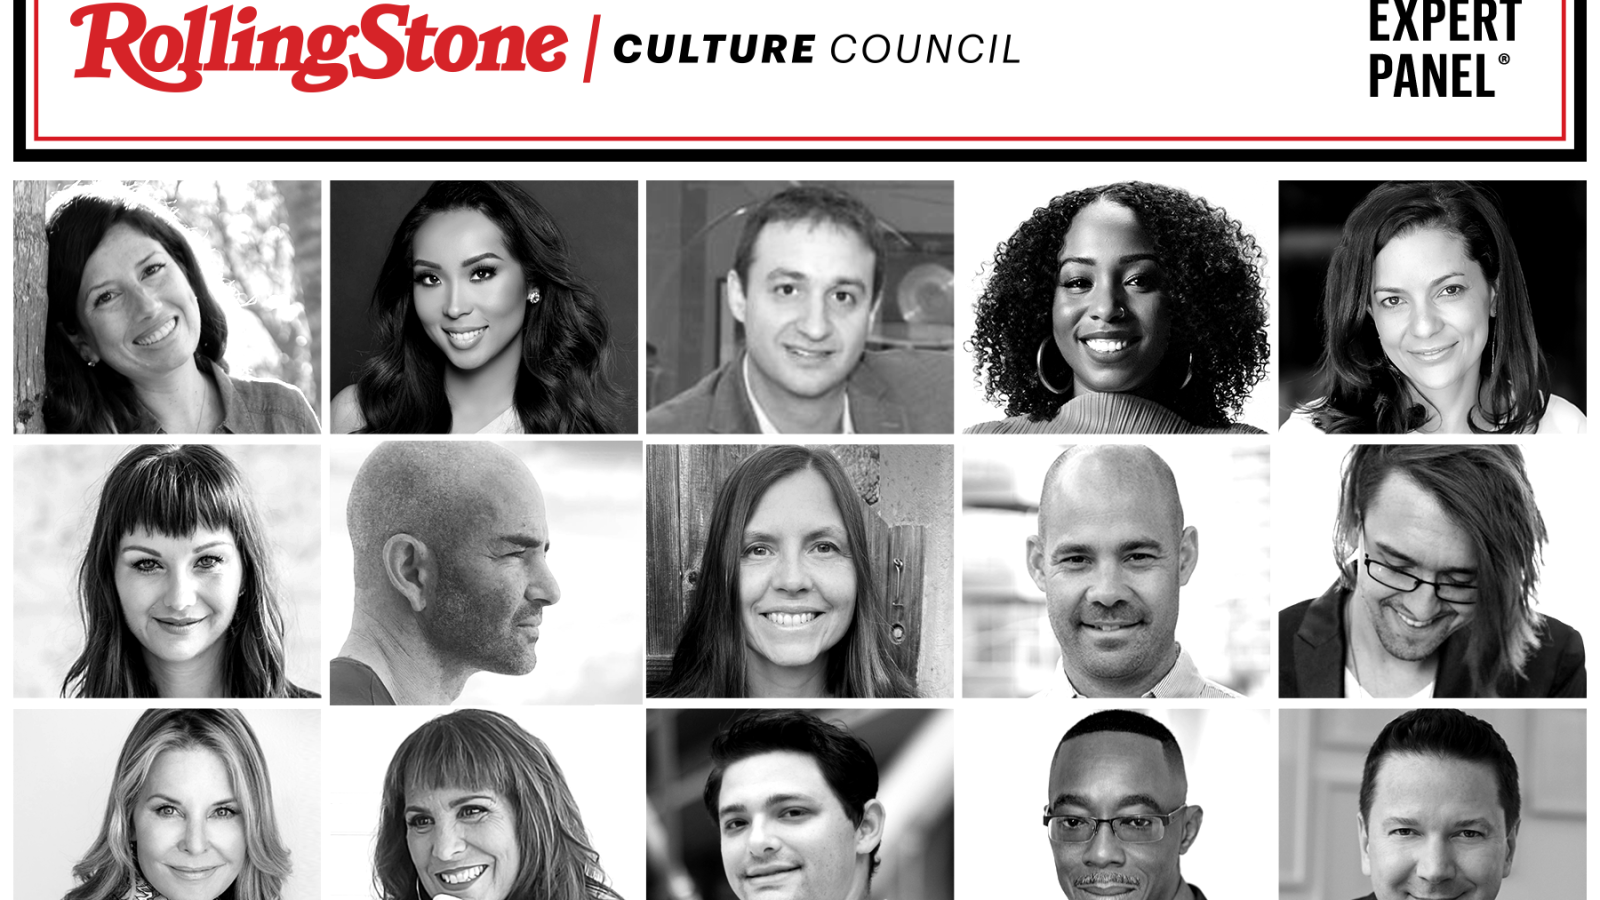 15 Culture Leaders Share Their Tips for Developing a Great Business Concept